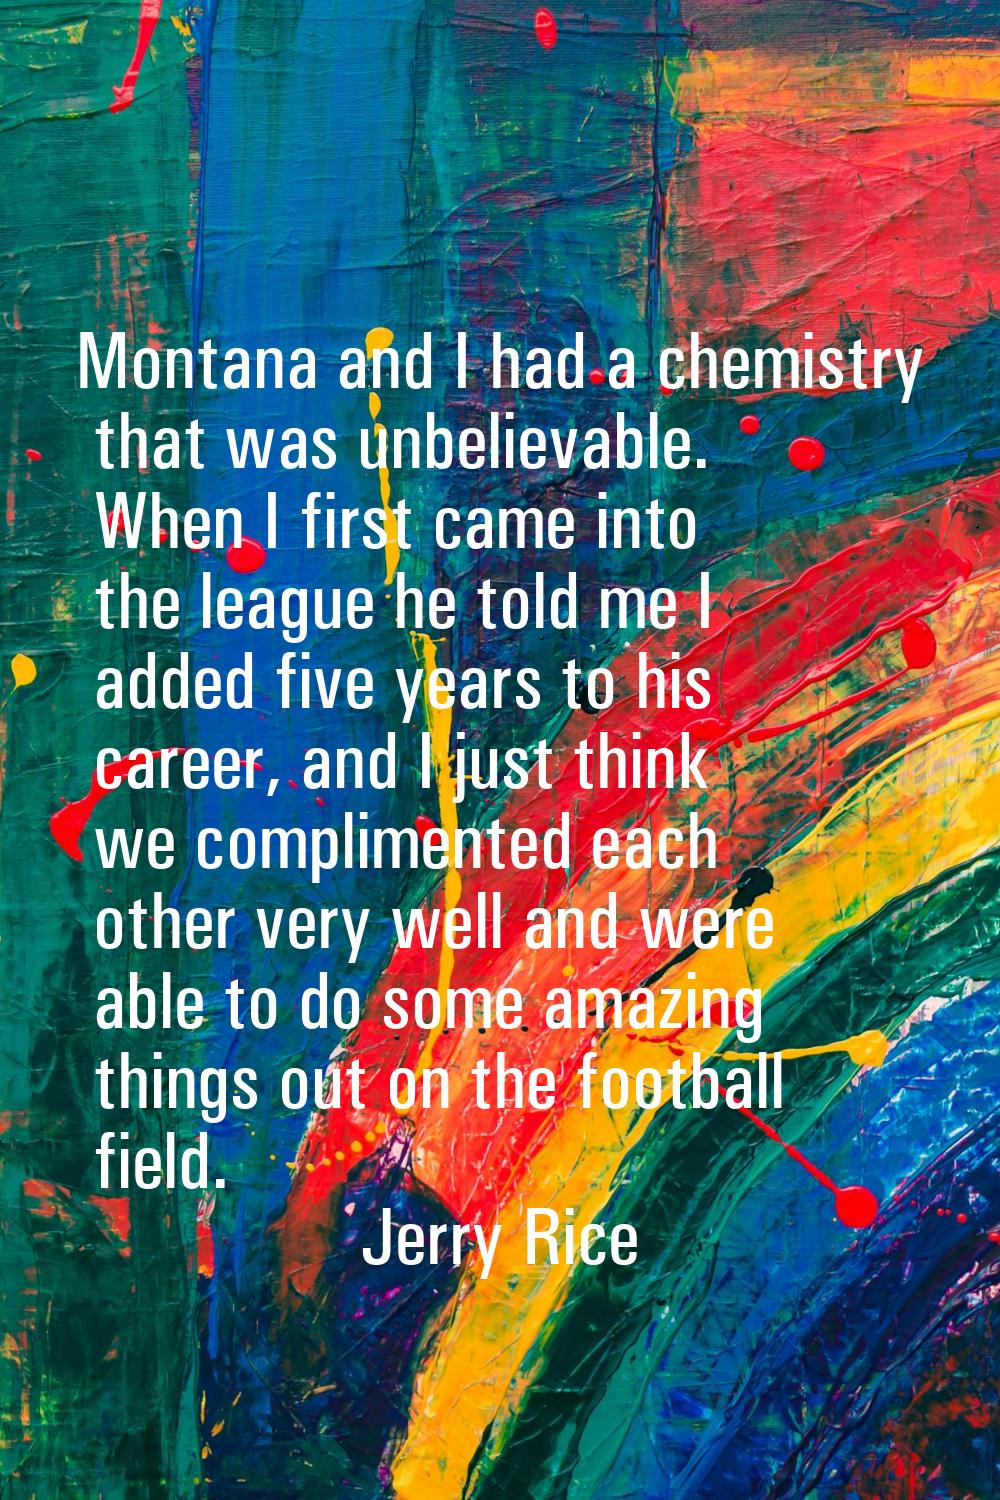 Montana and I had a chemistry that was unbelievable. When I first came into the league he told me I